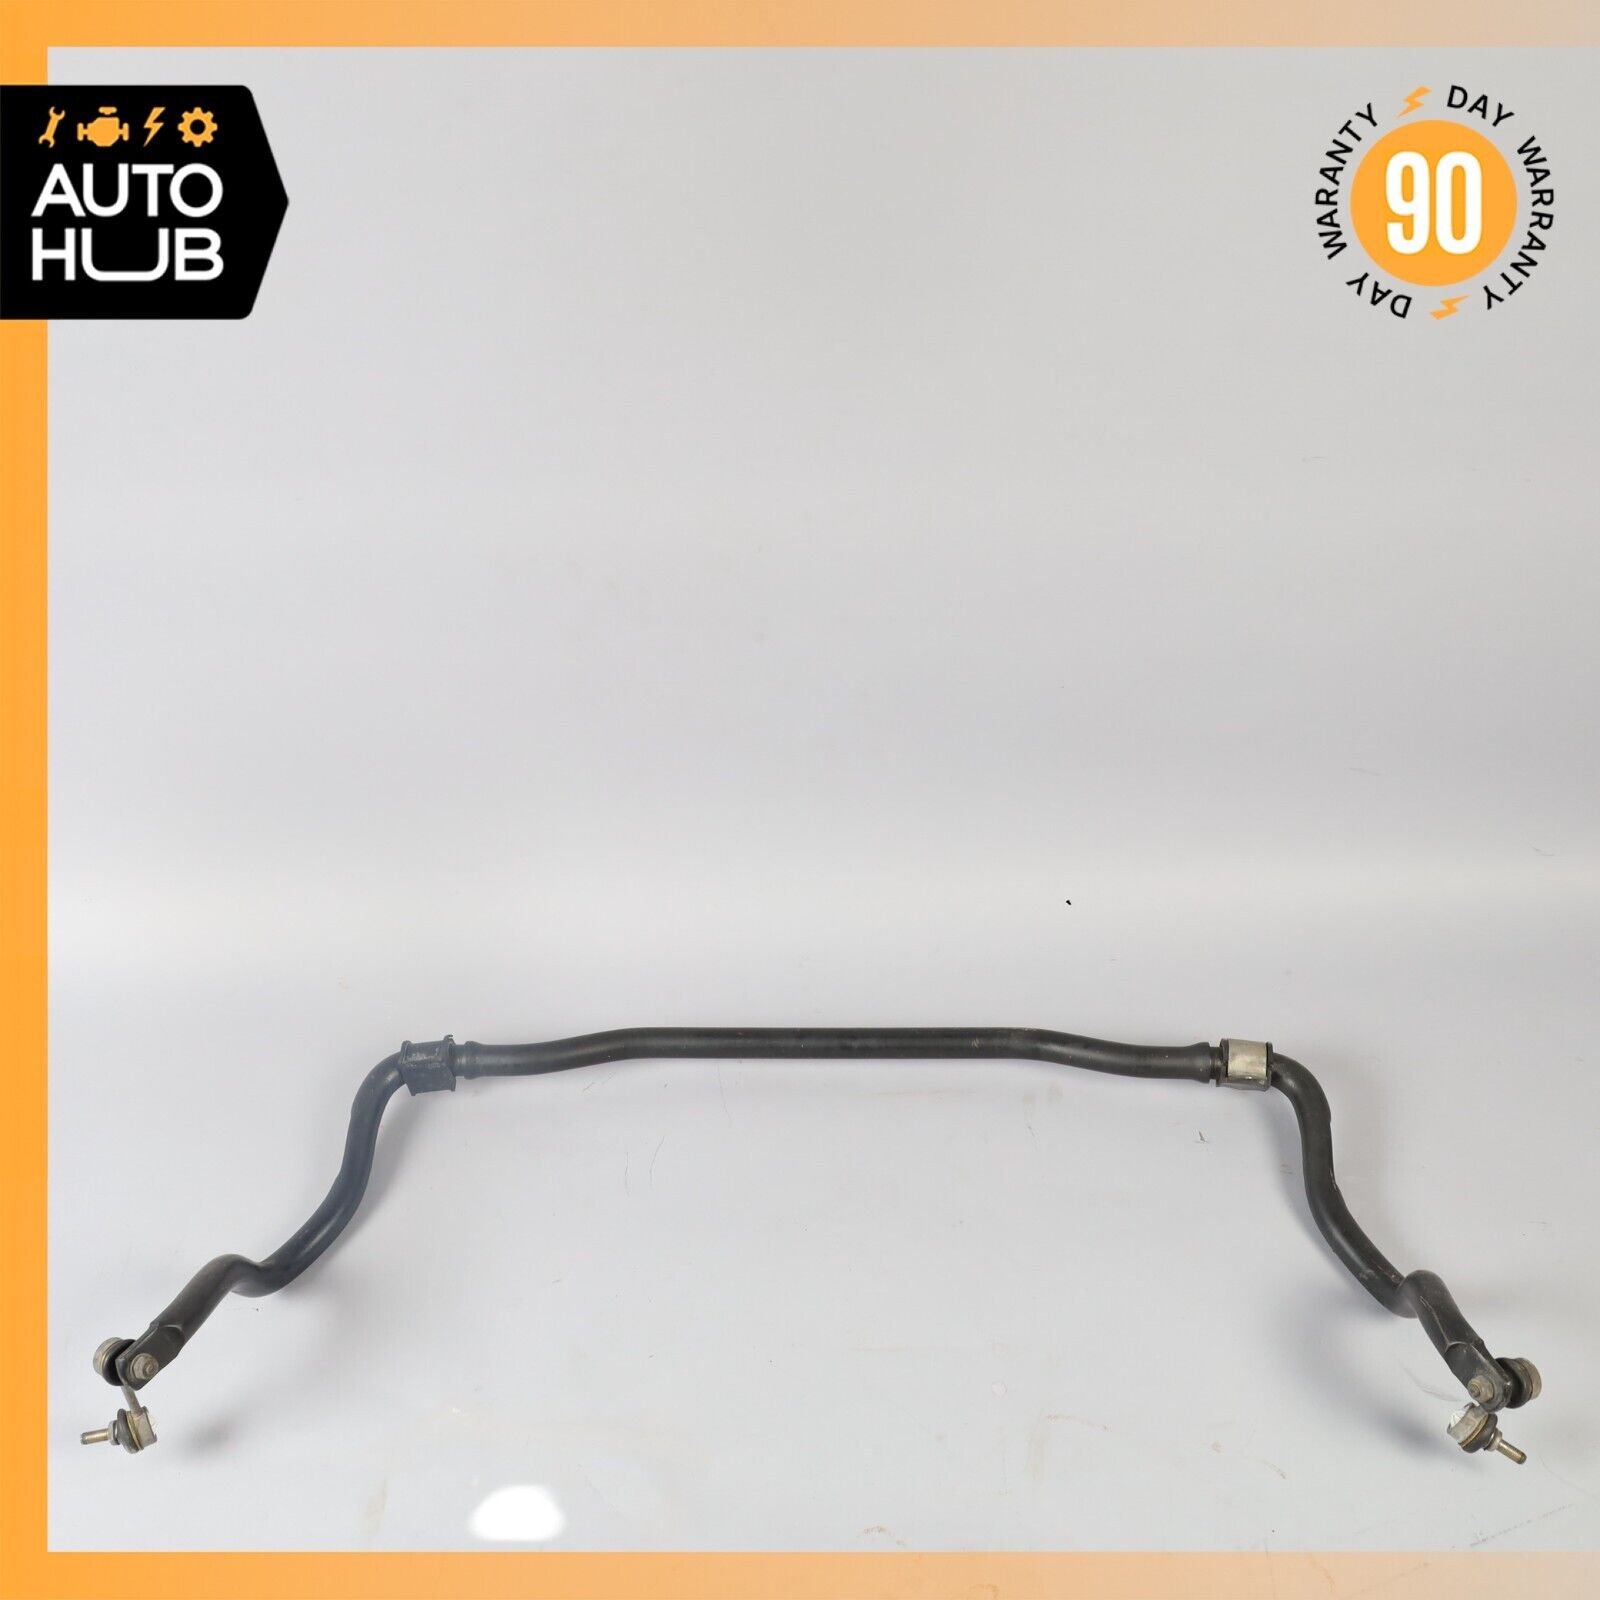 02-07 Maserati Coupe 4200 GT M138 Front Anti Roll Stabilizer Sway Bar 195320 OEM